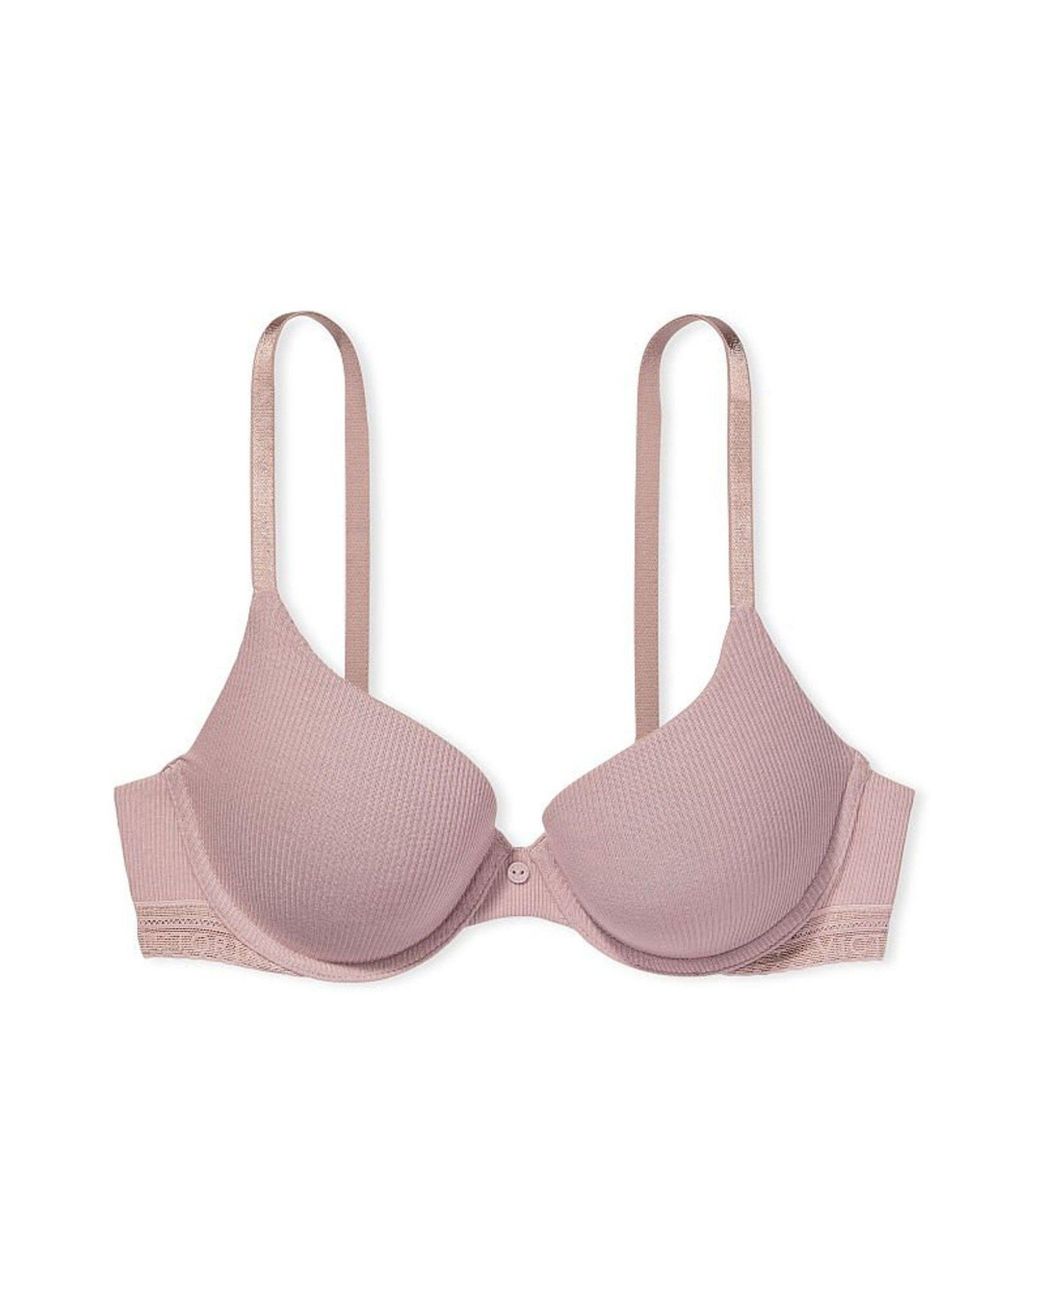 VICTORIA'S SECRET PINK RIBBED LACE-UP | capacitasalud.com